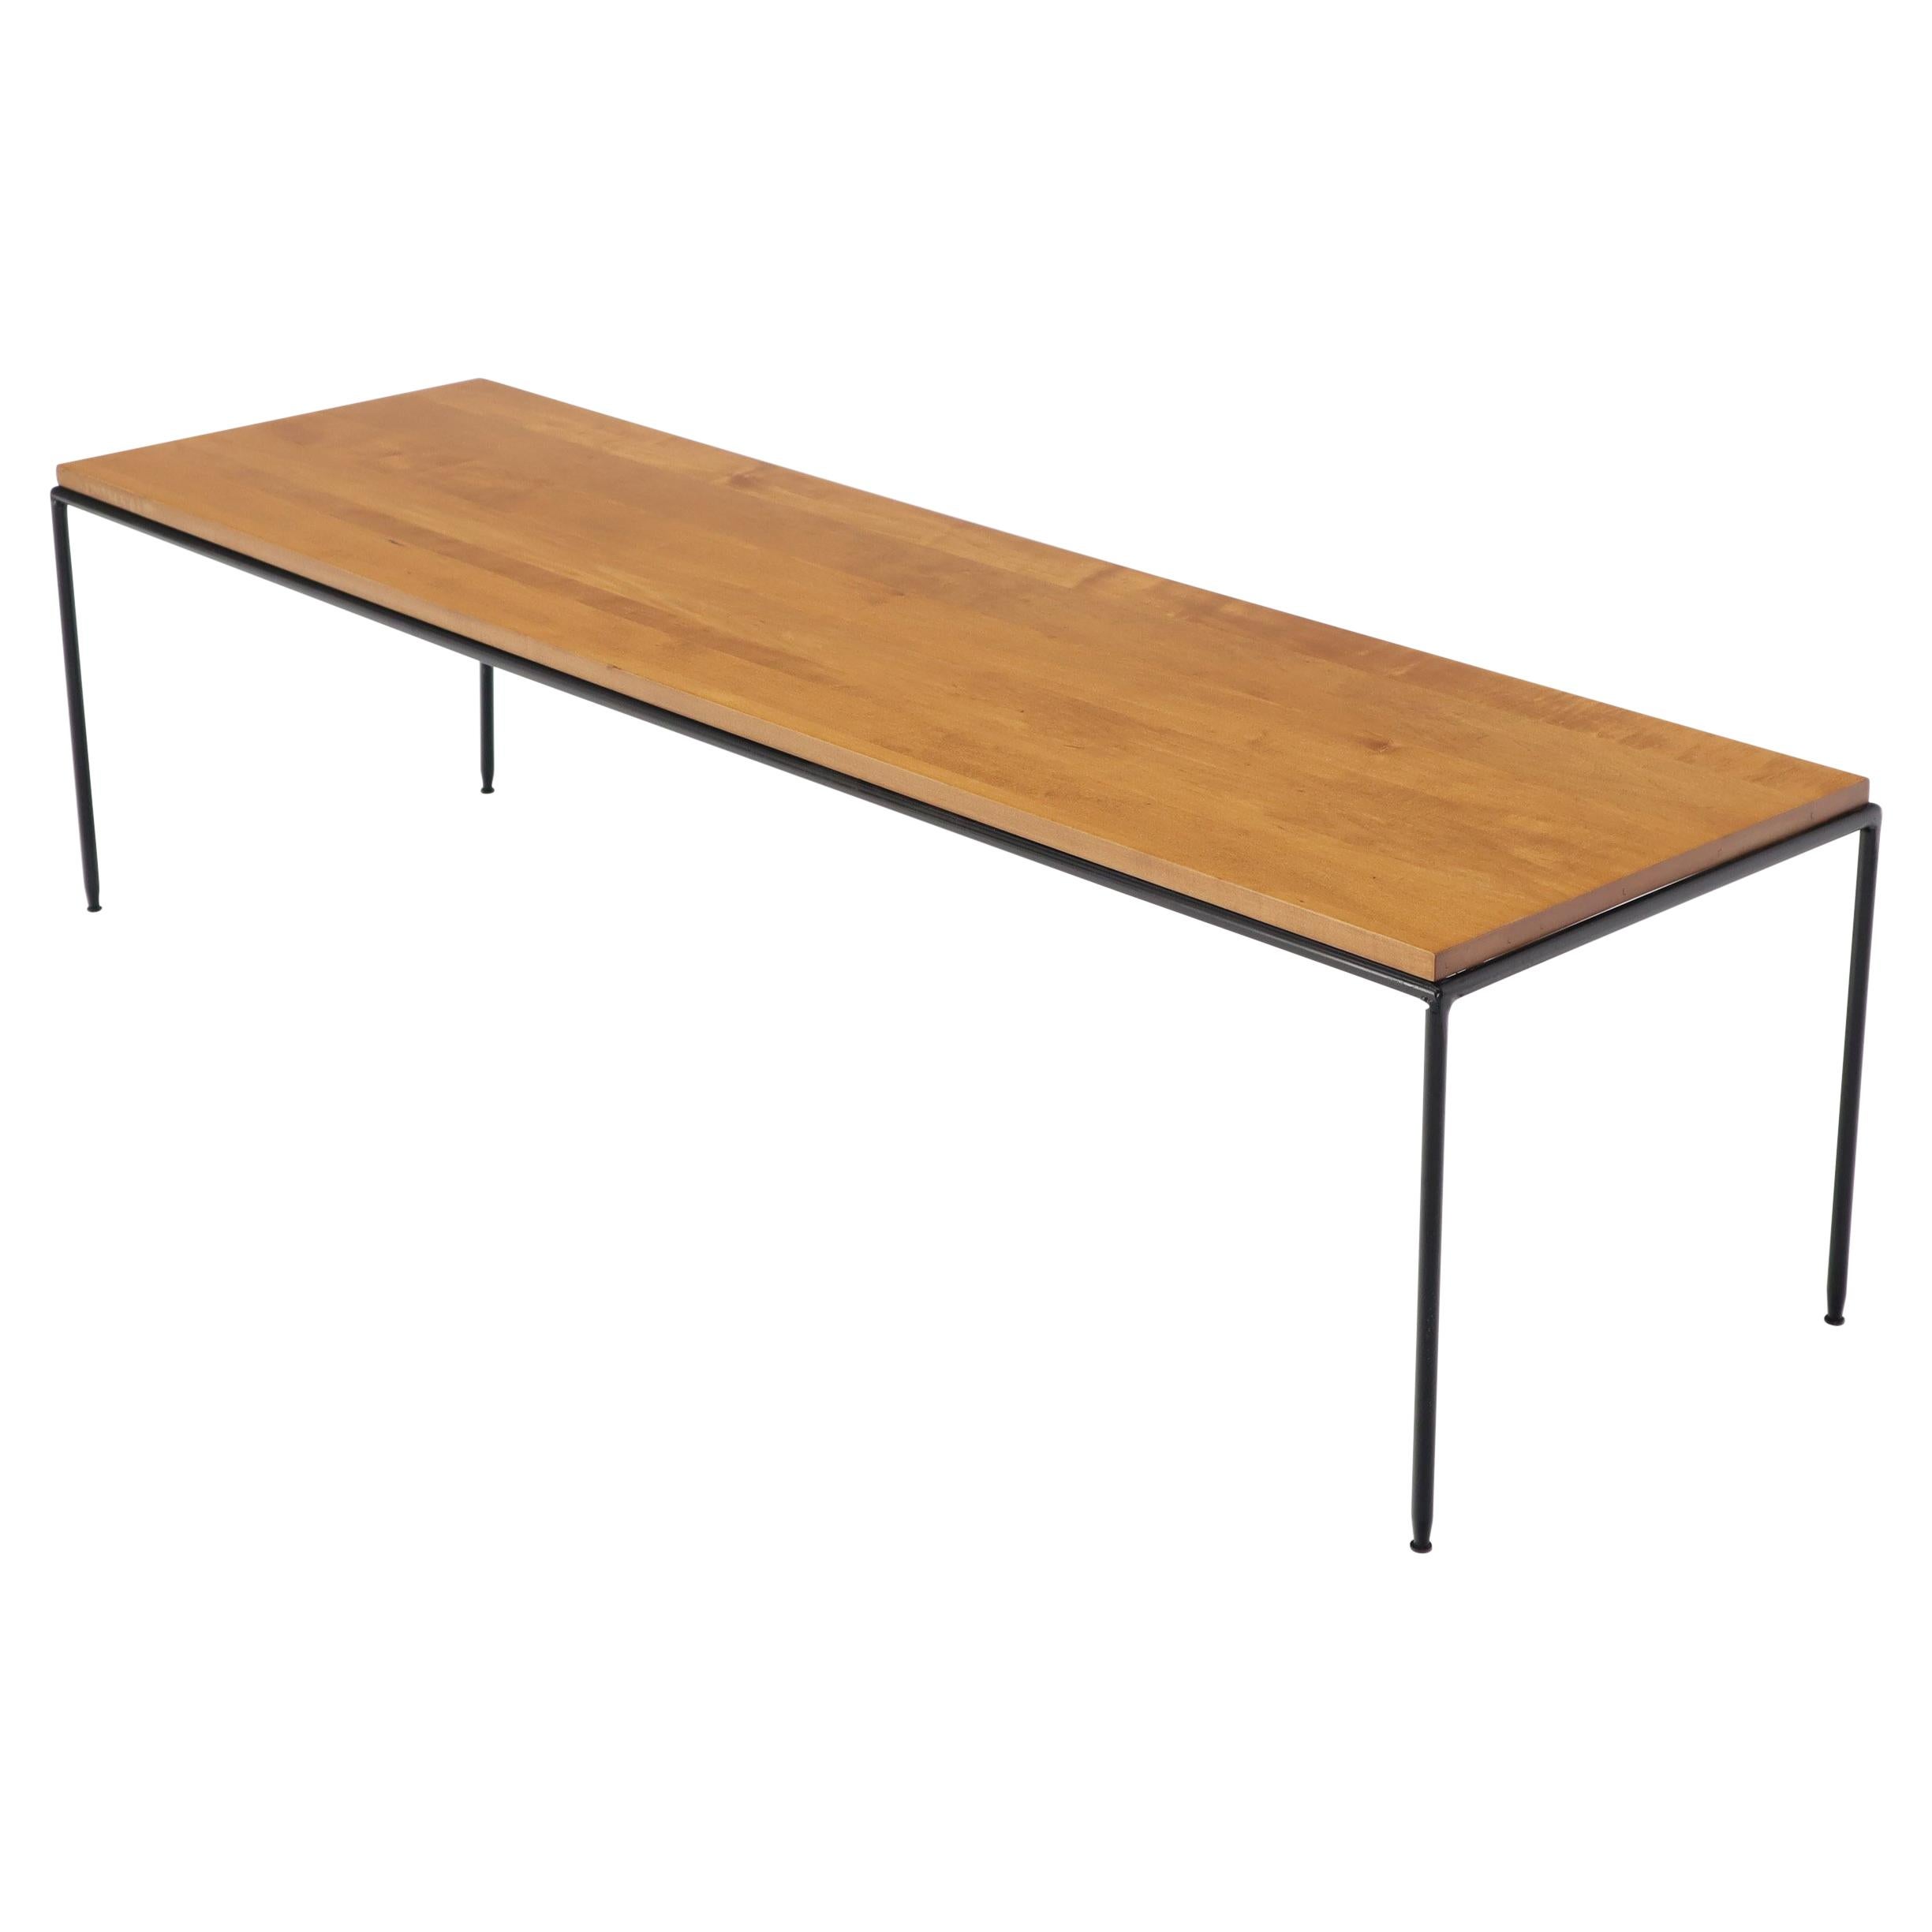 Paul McCobb Planner Group Bench or Coffee Table Solid Plank Wood Top Iron Base